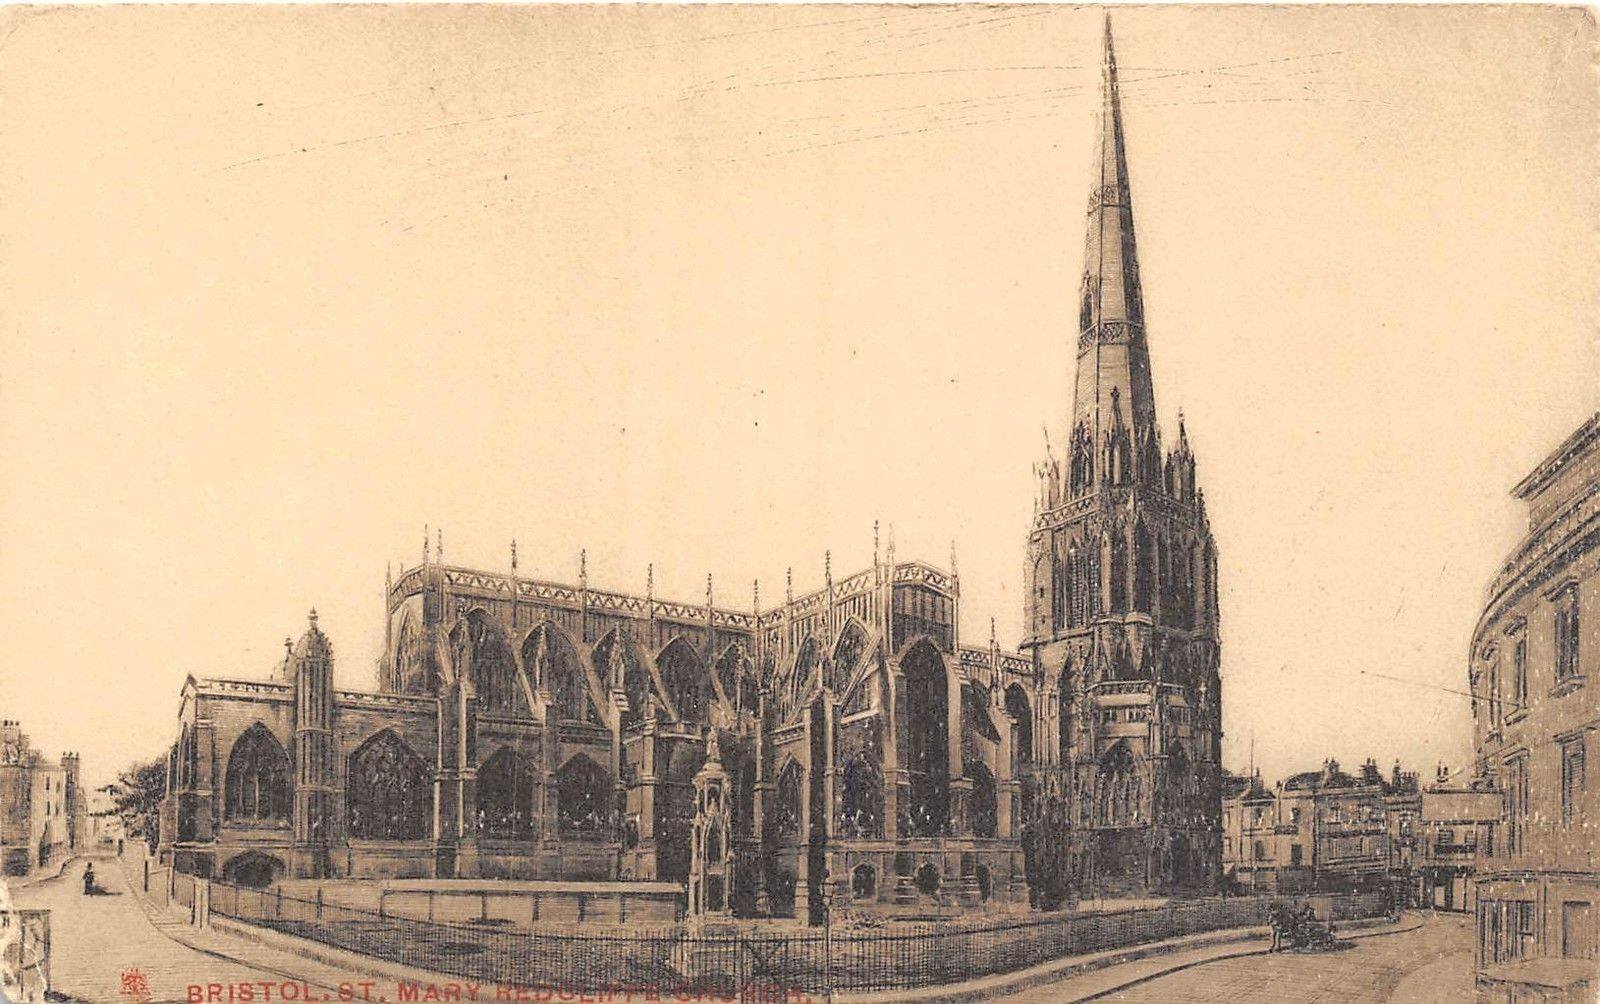 St Mary Redcliffe Church in Bristol